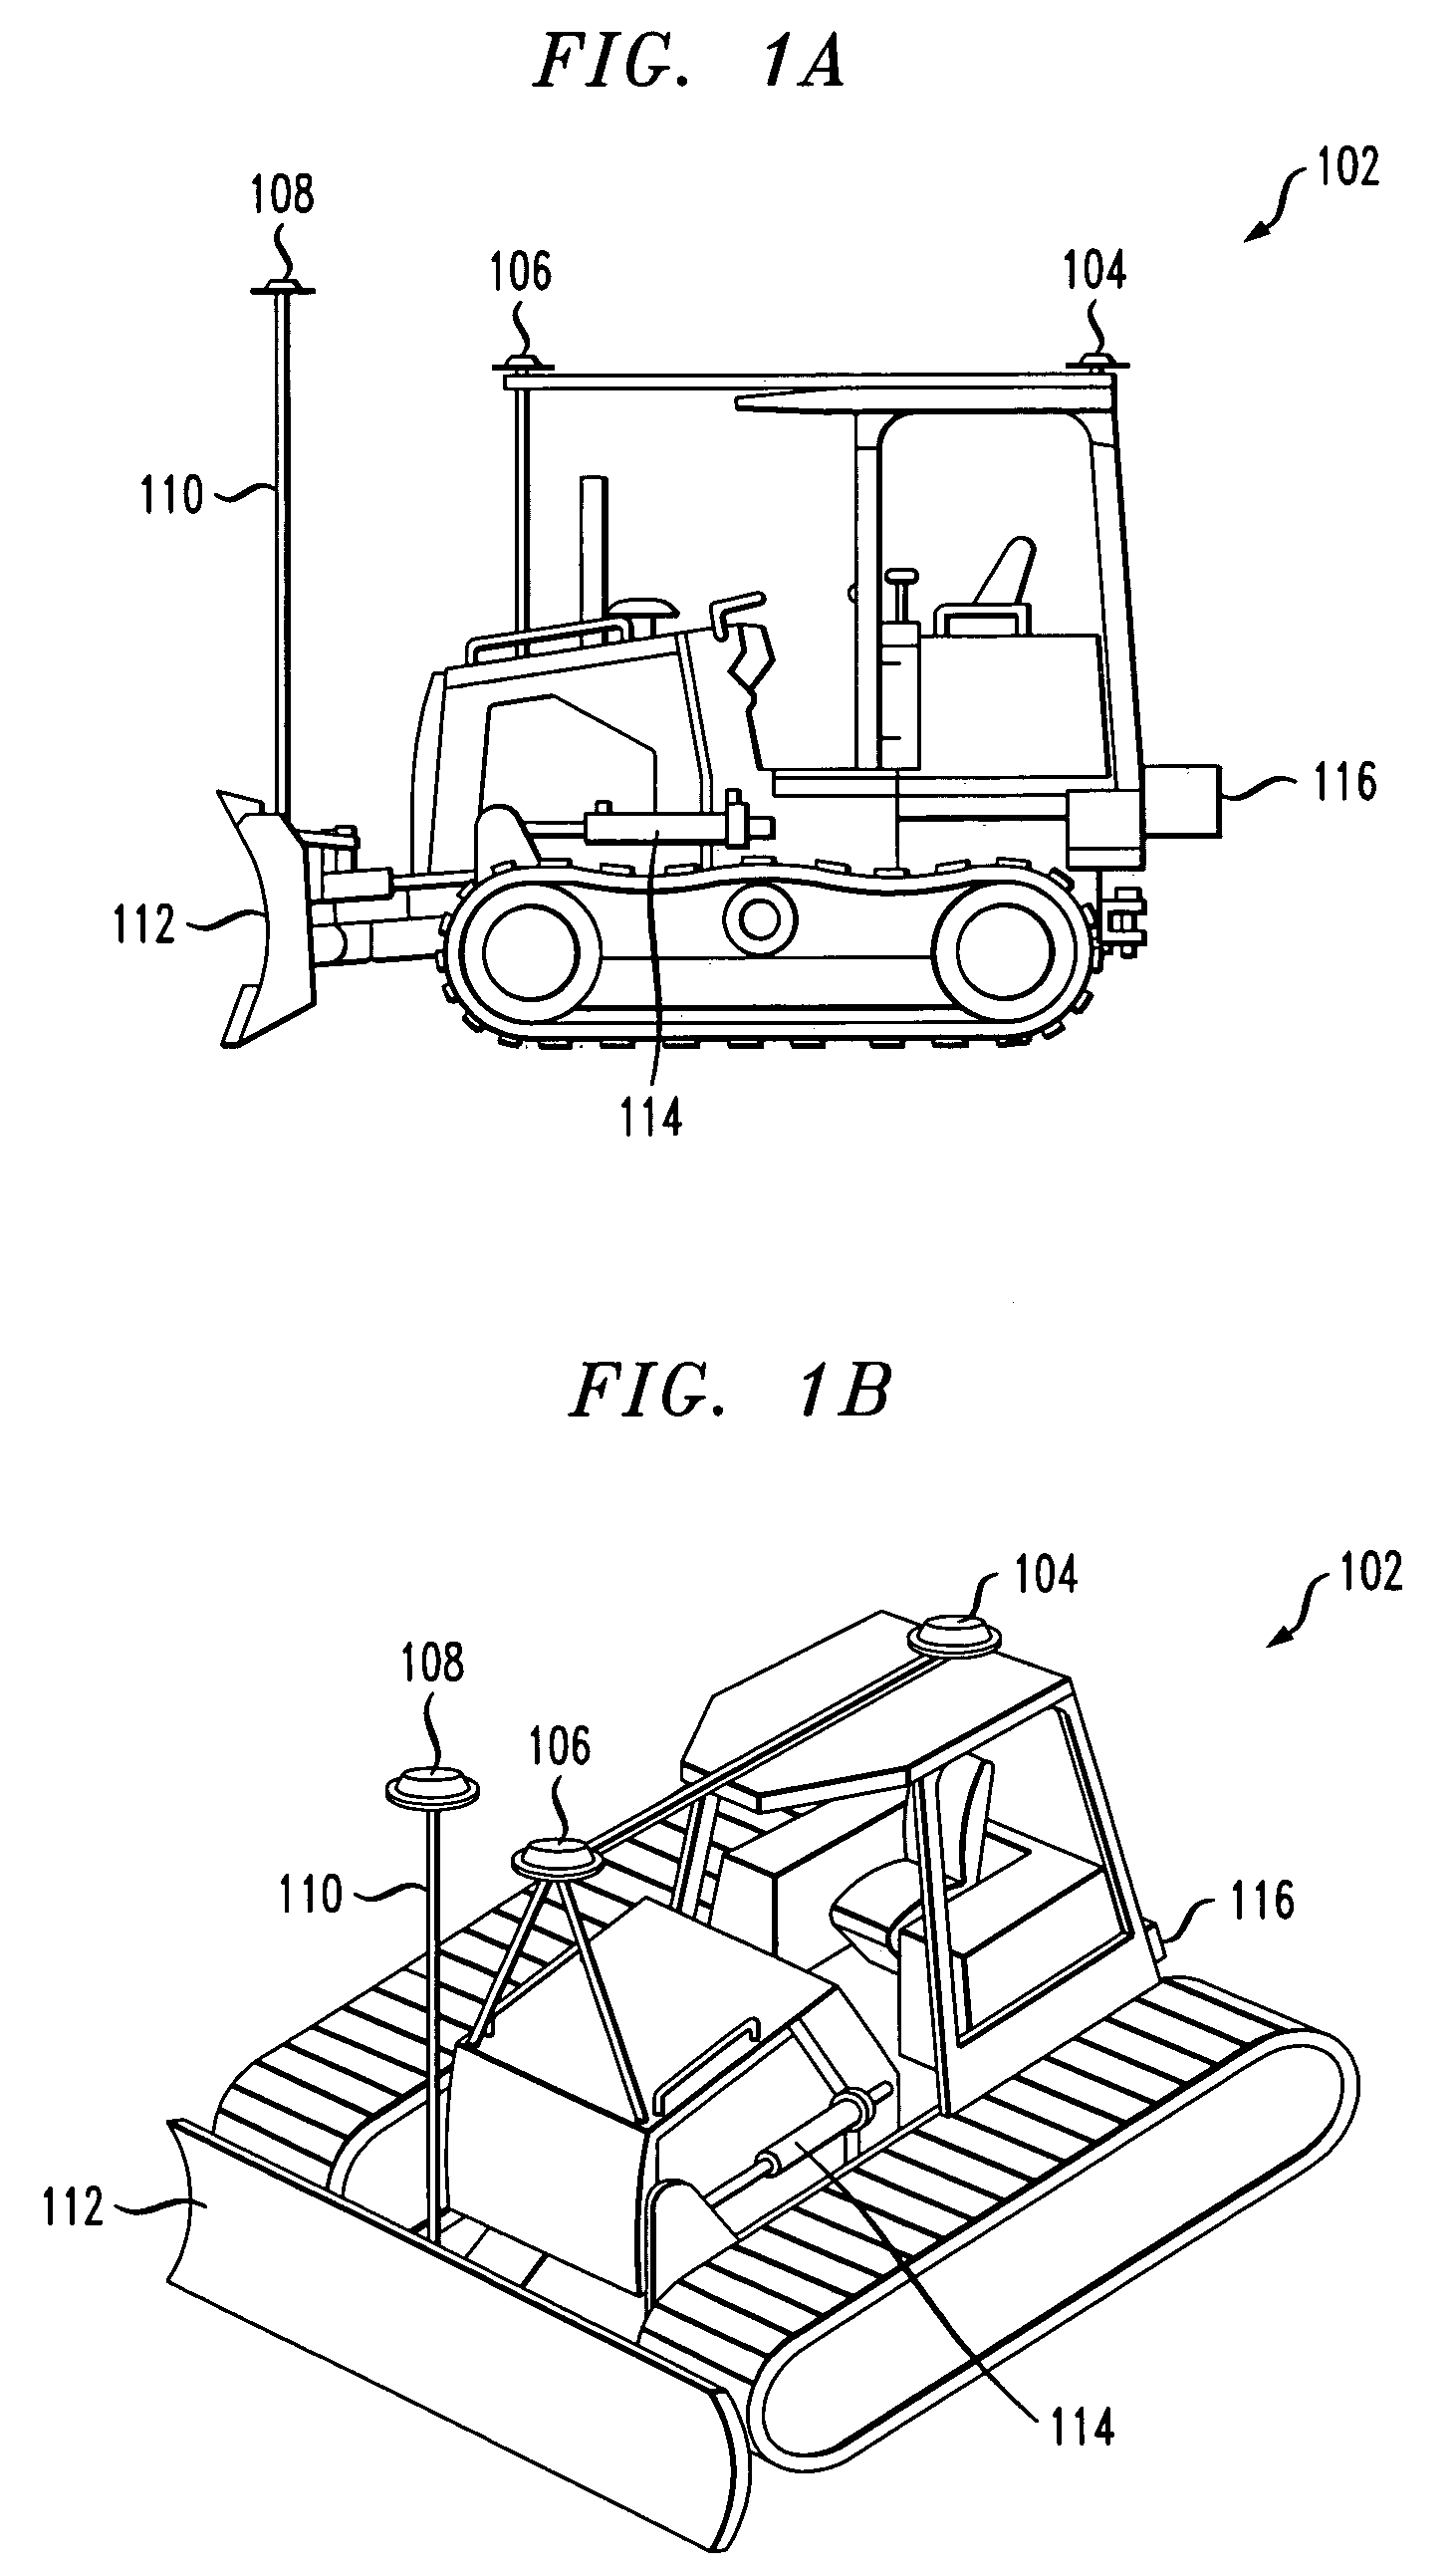 Dynamic stabilization and control of an earthmoving machine